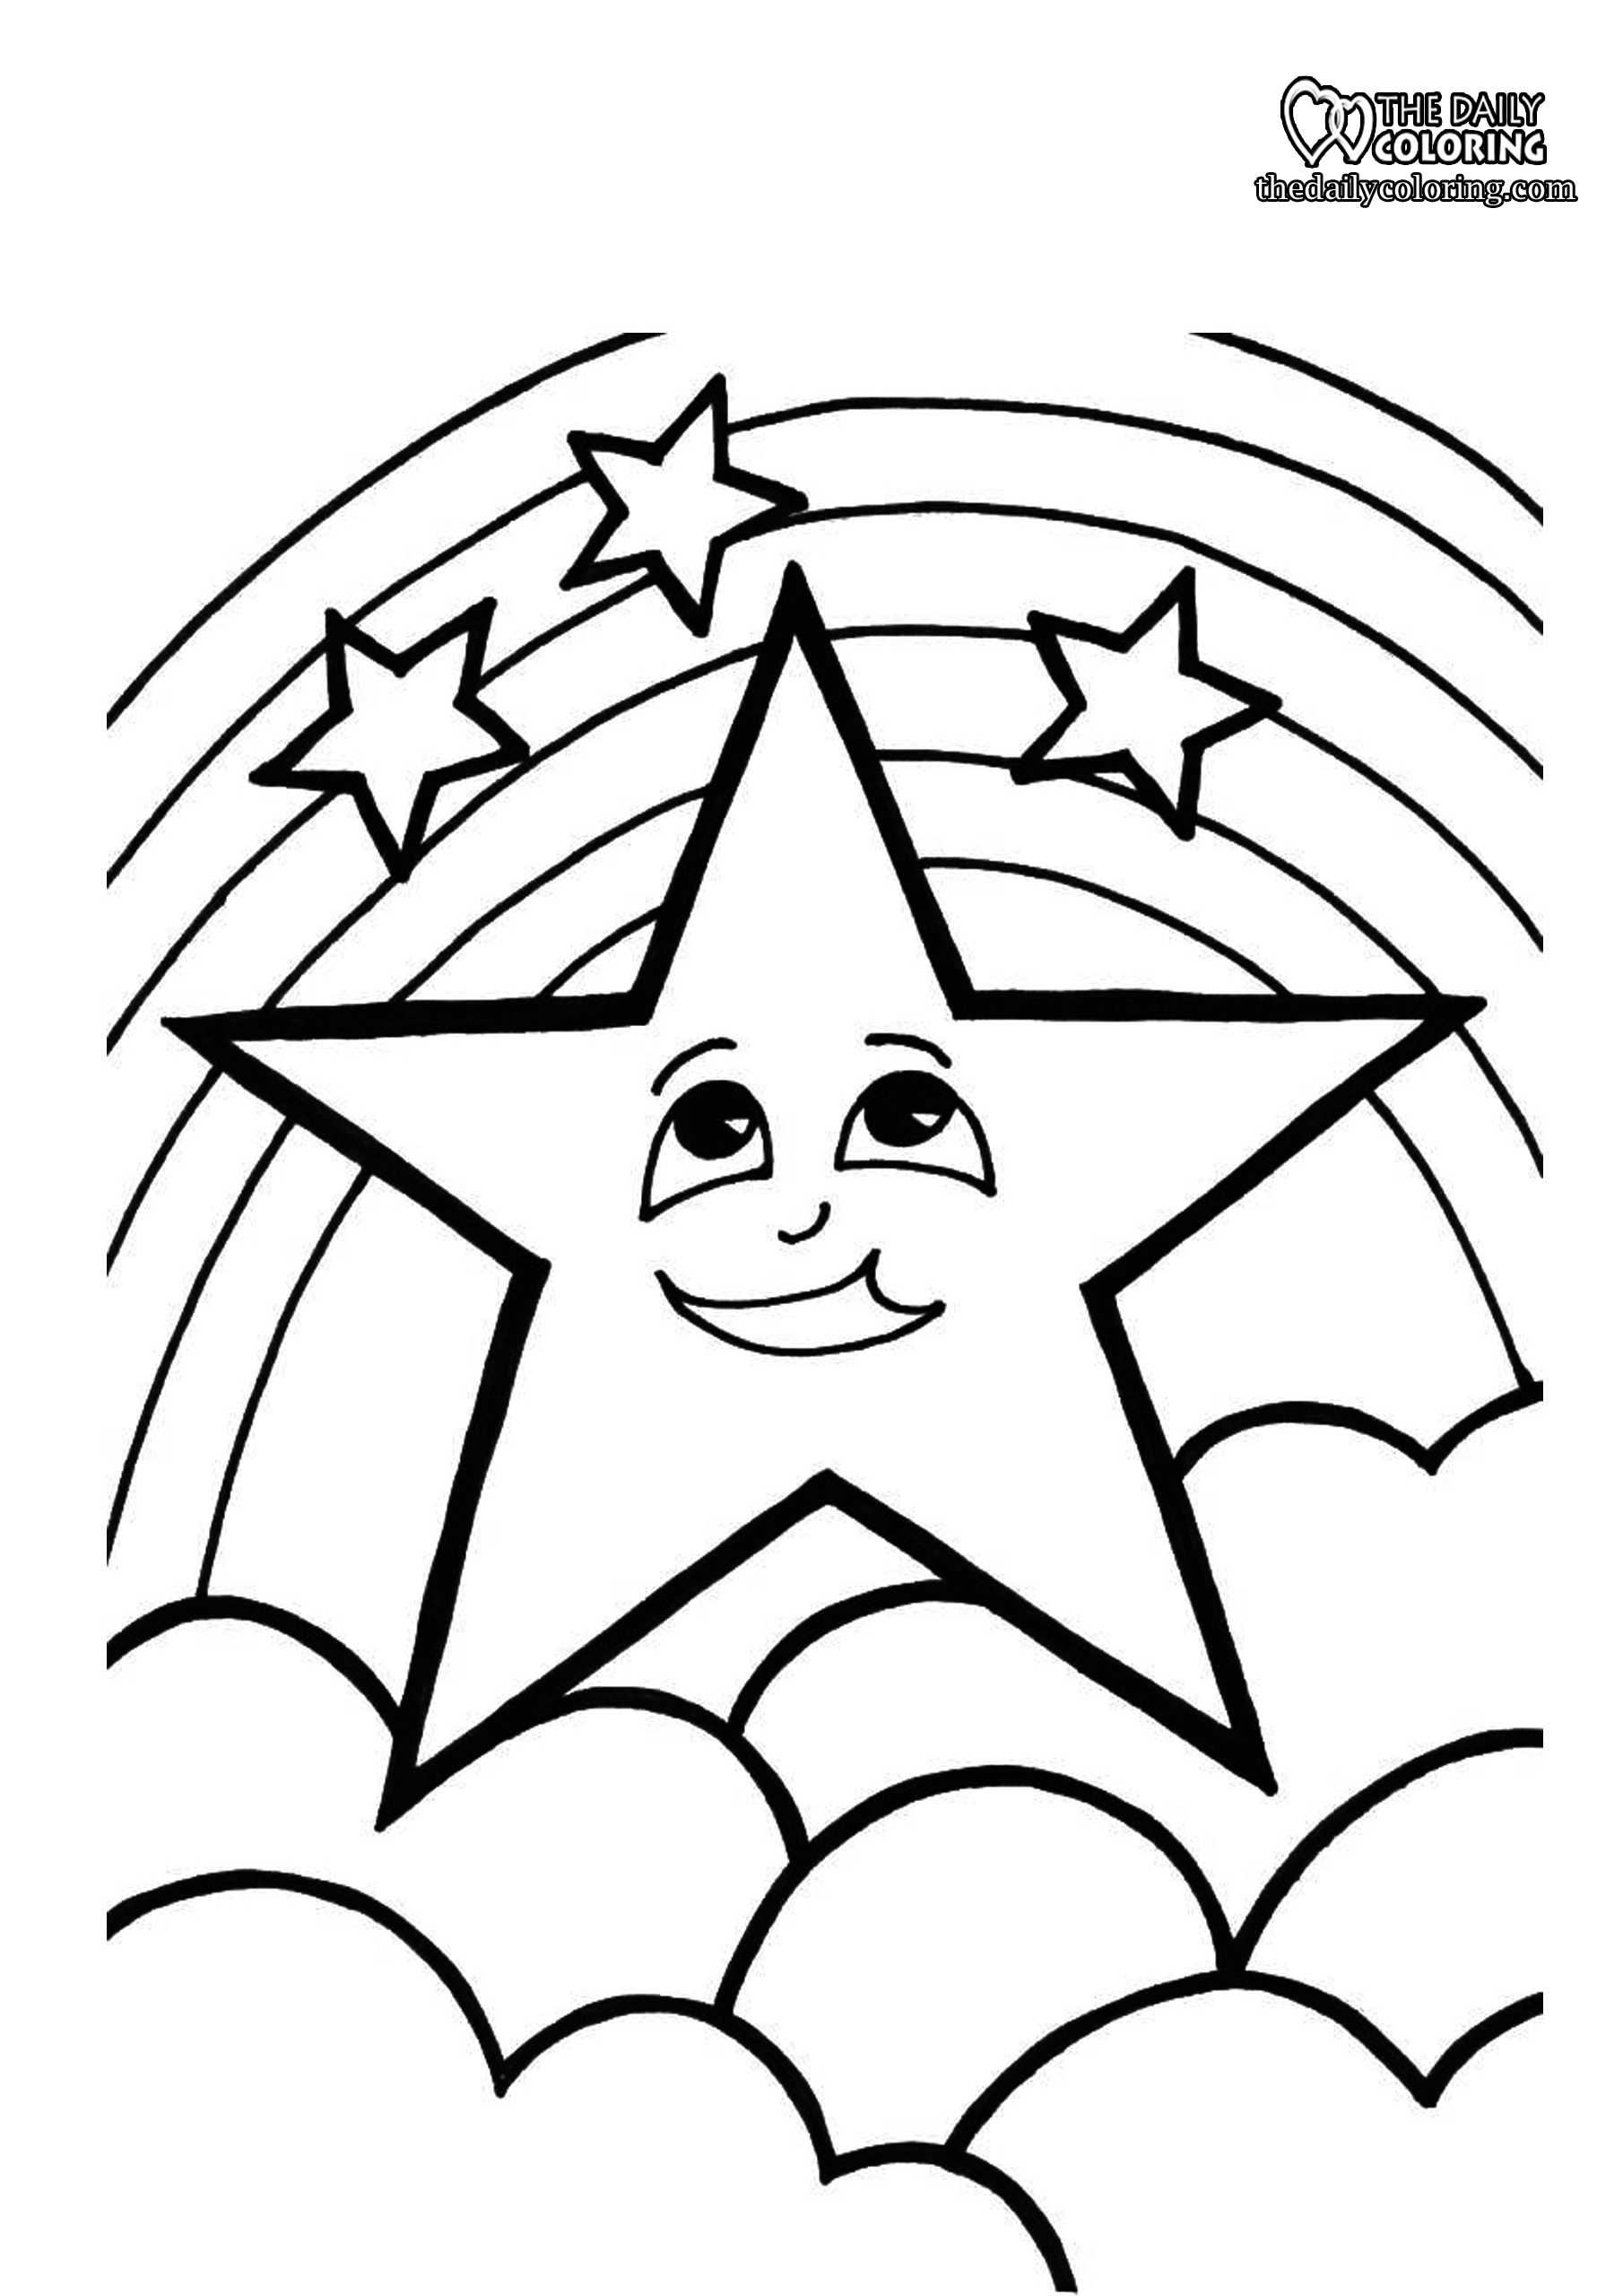 Stars Coloring Pages   The Daily Coloring